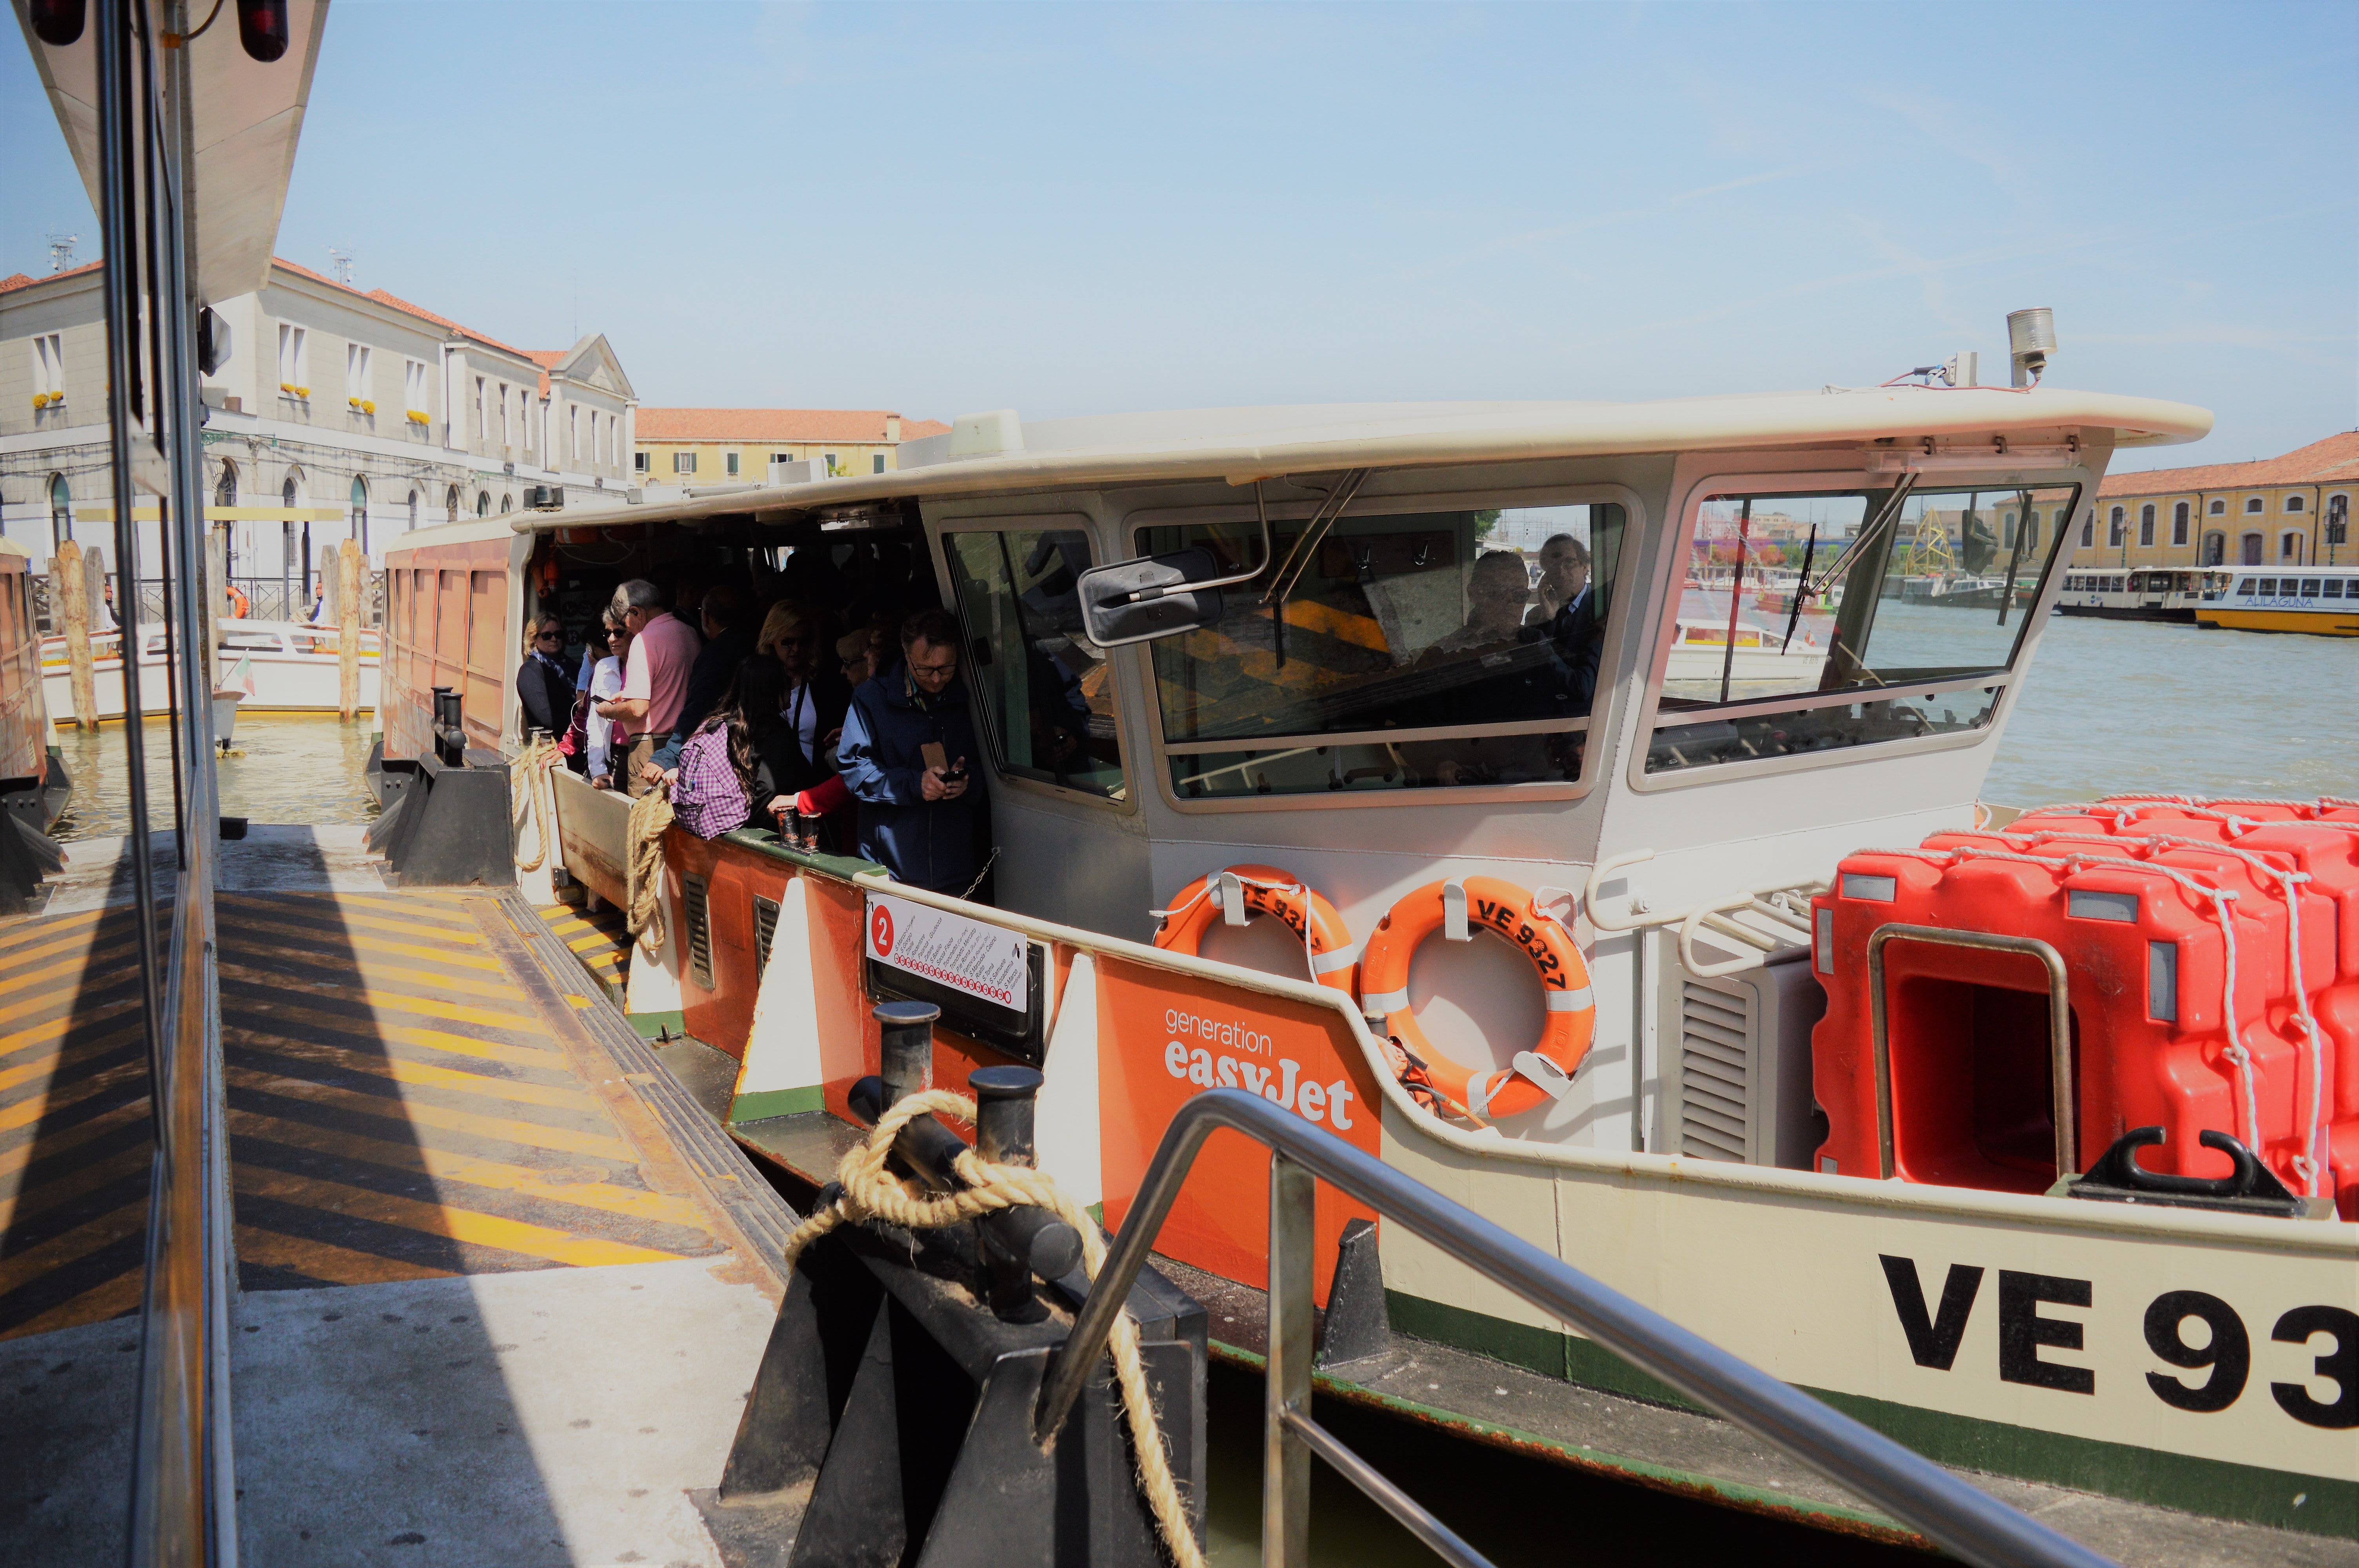 How to Take the Vaporetto in Venice 1